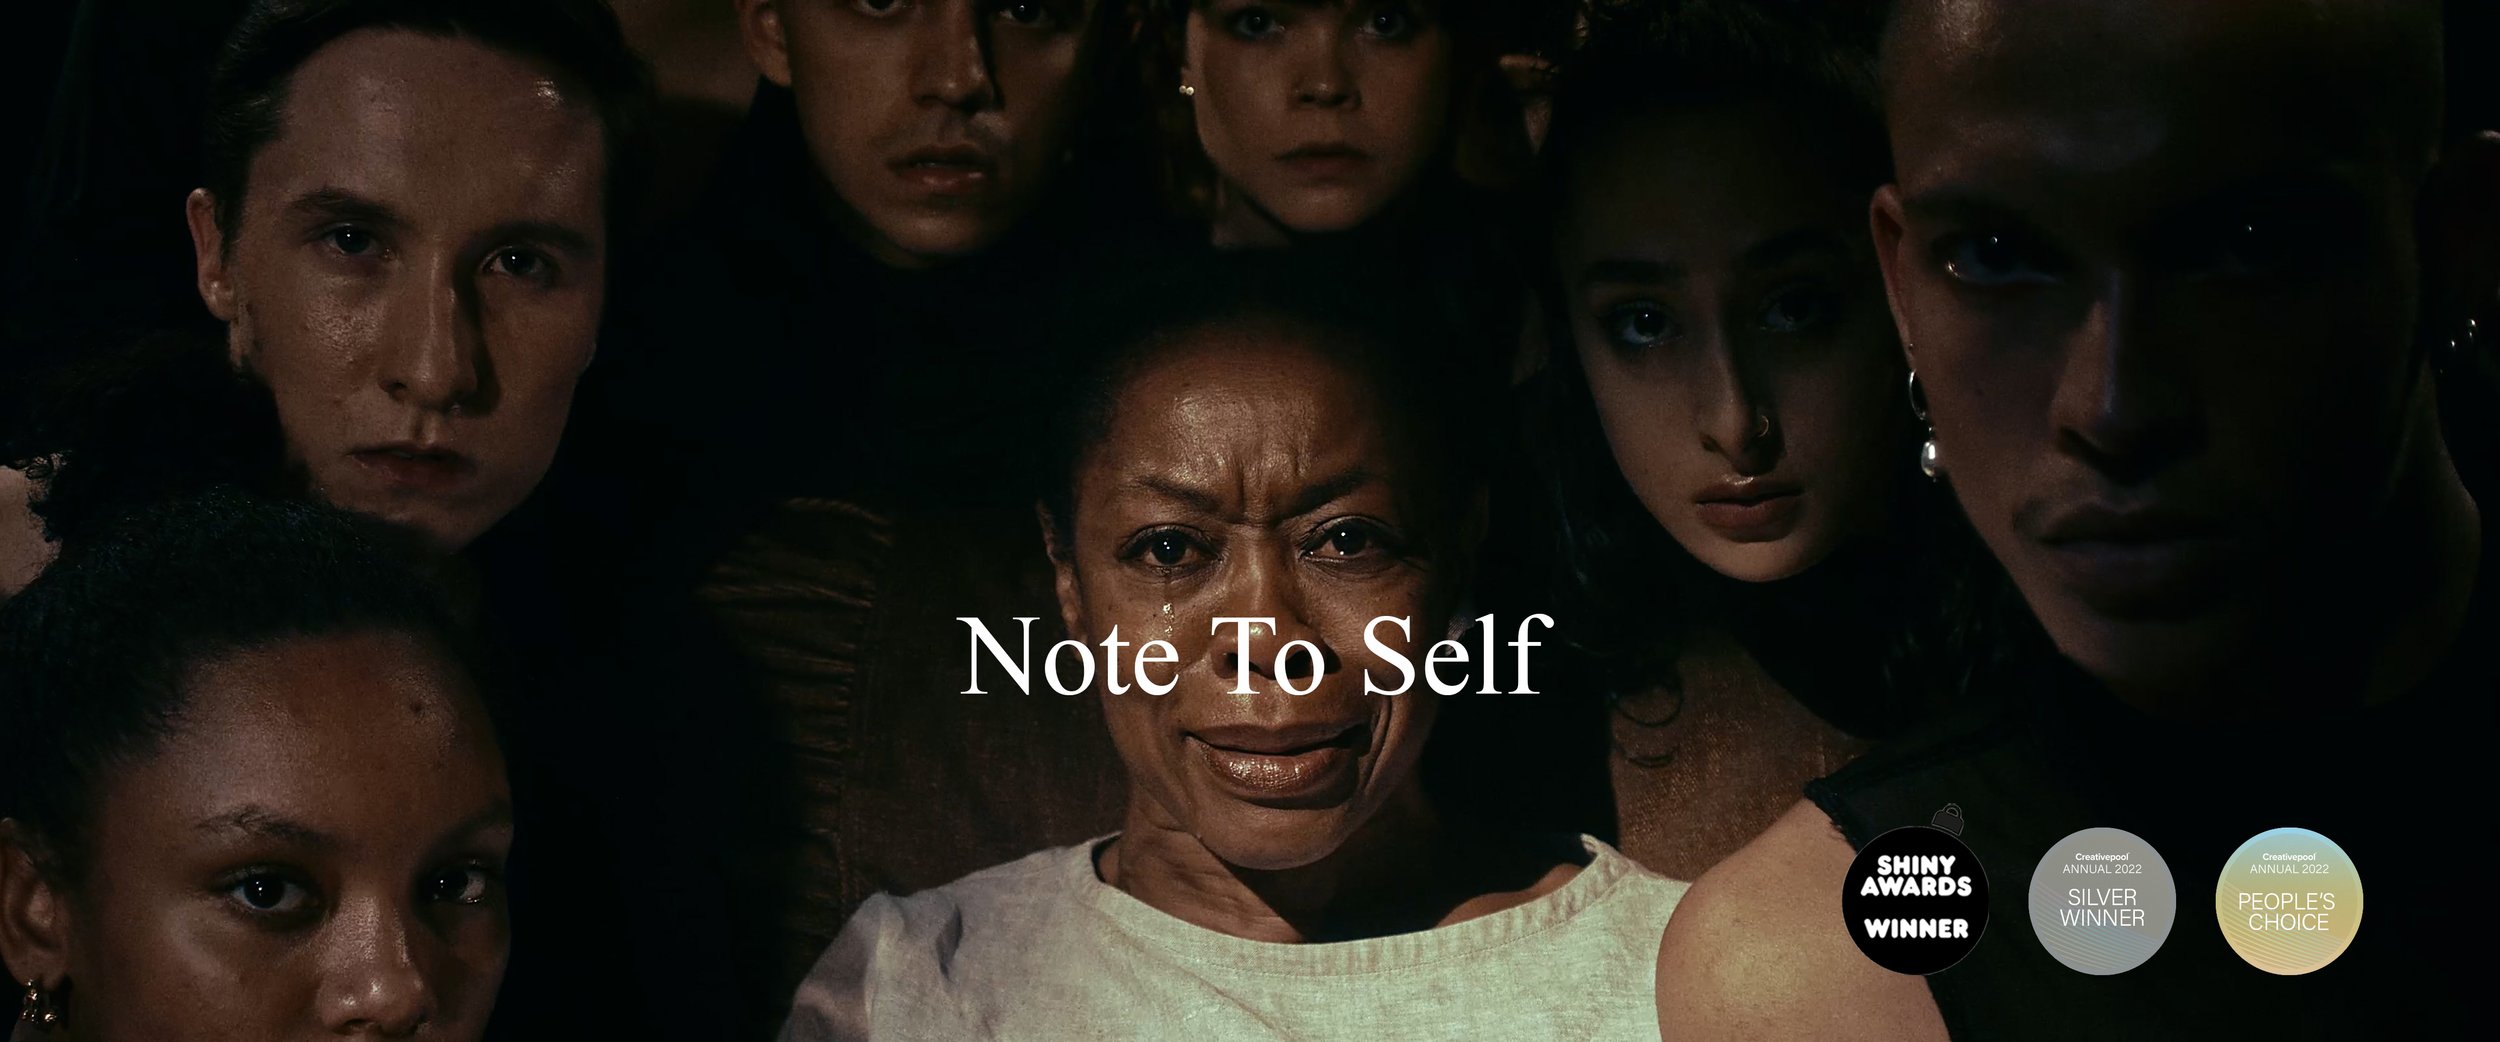 NOTE TO SELF (Promo)